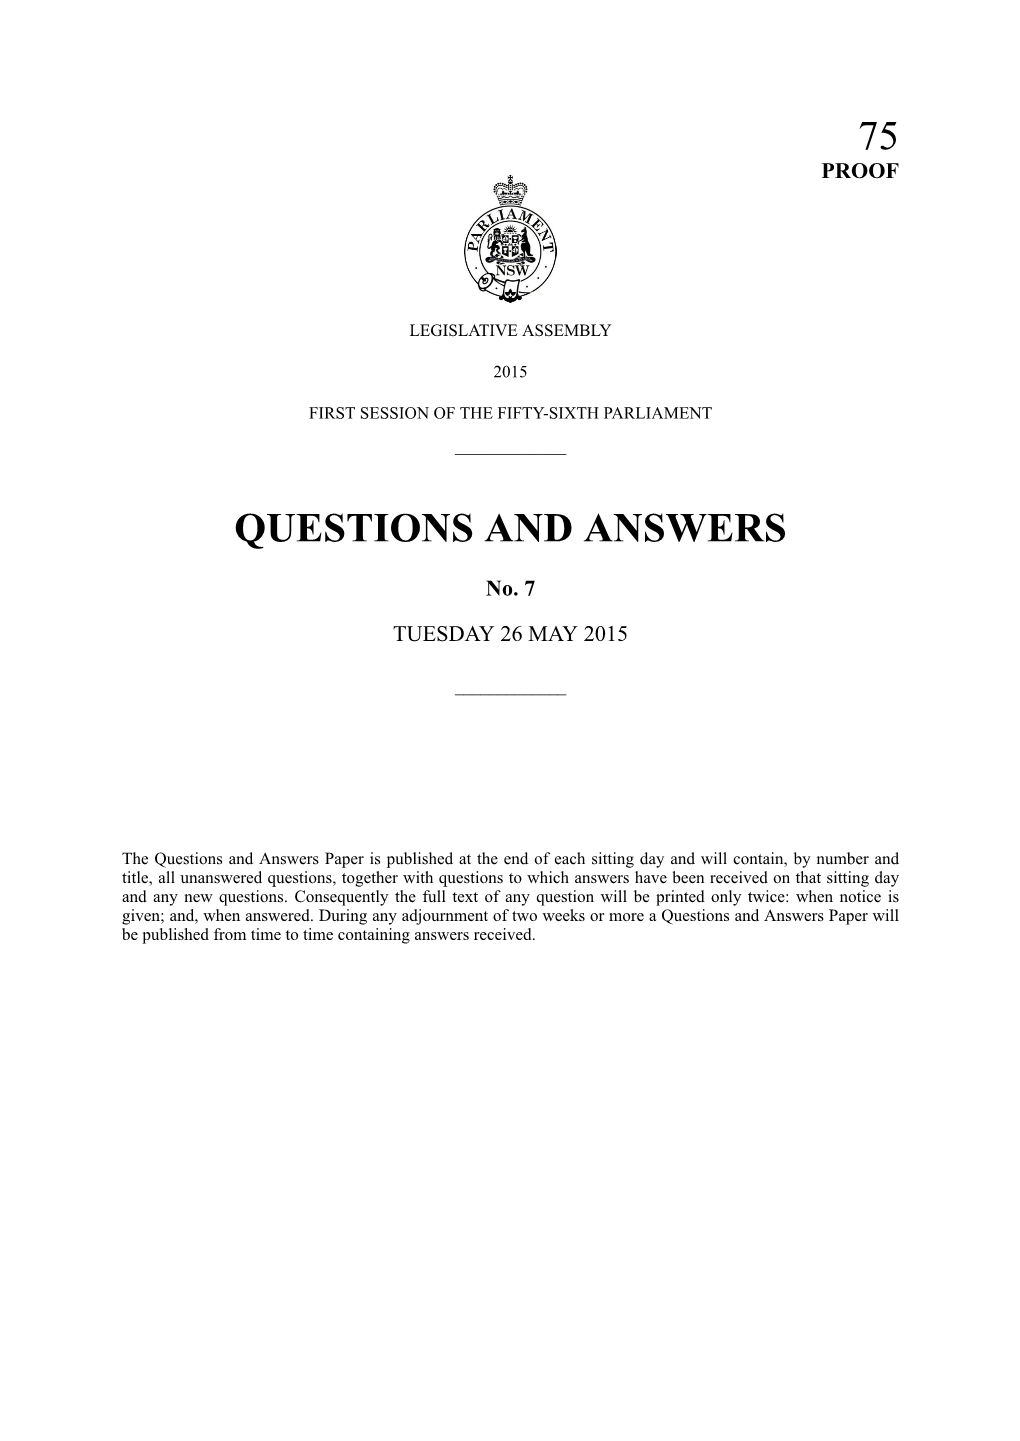 Questions and Answers 75